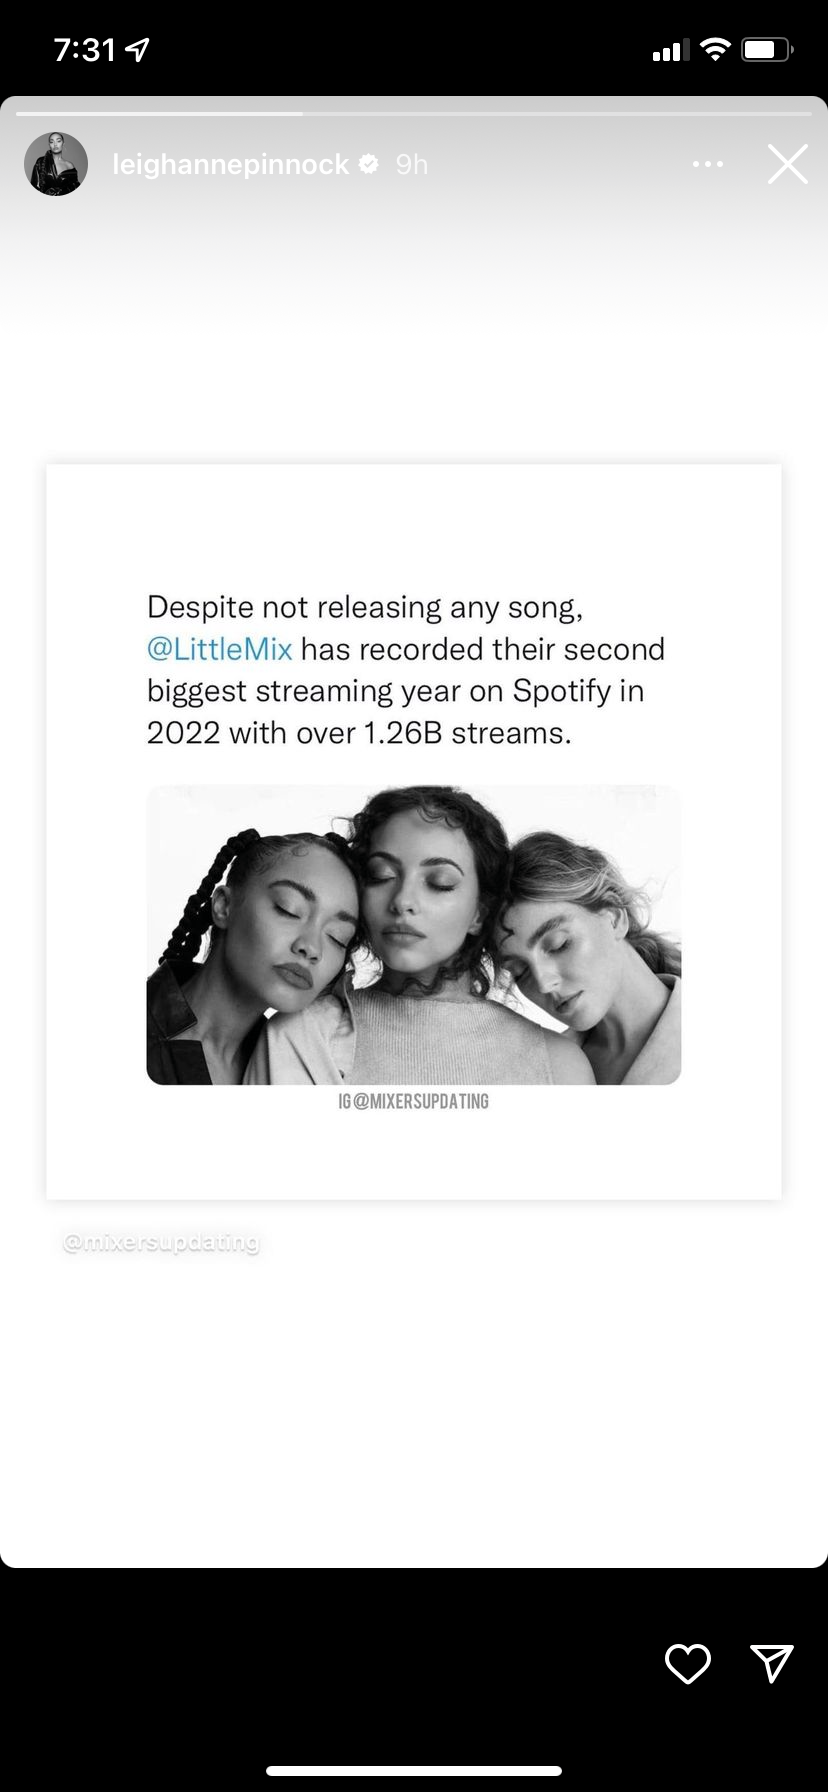 //Little Mix Spotify Streaming